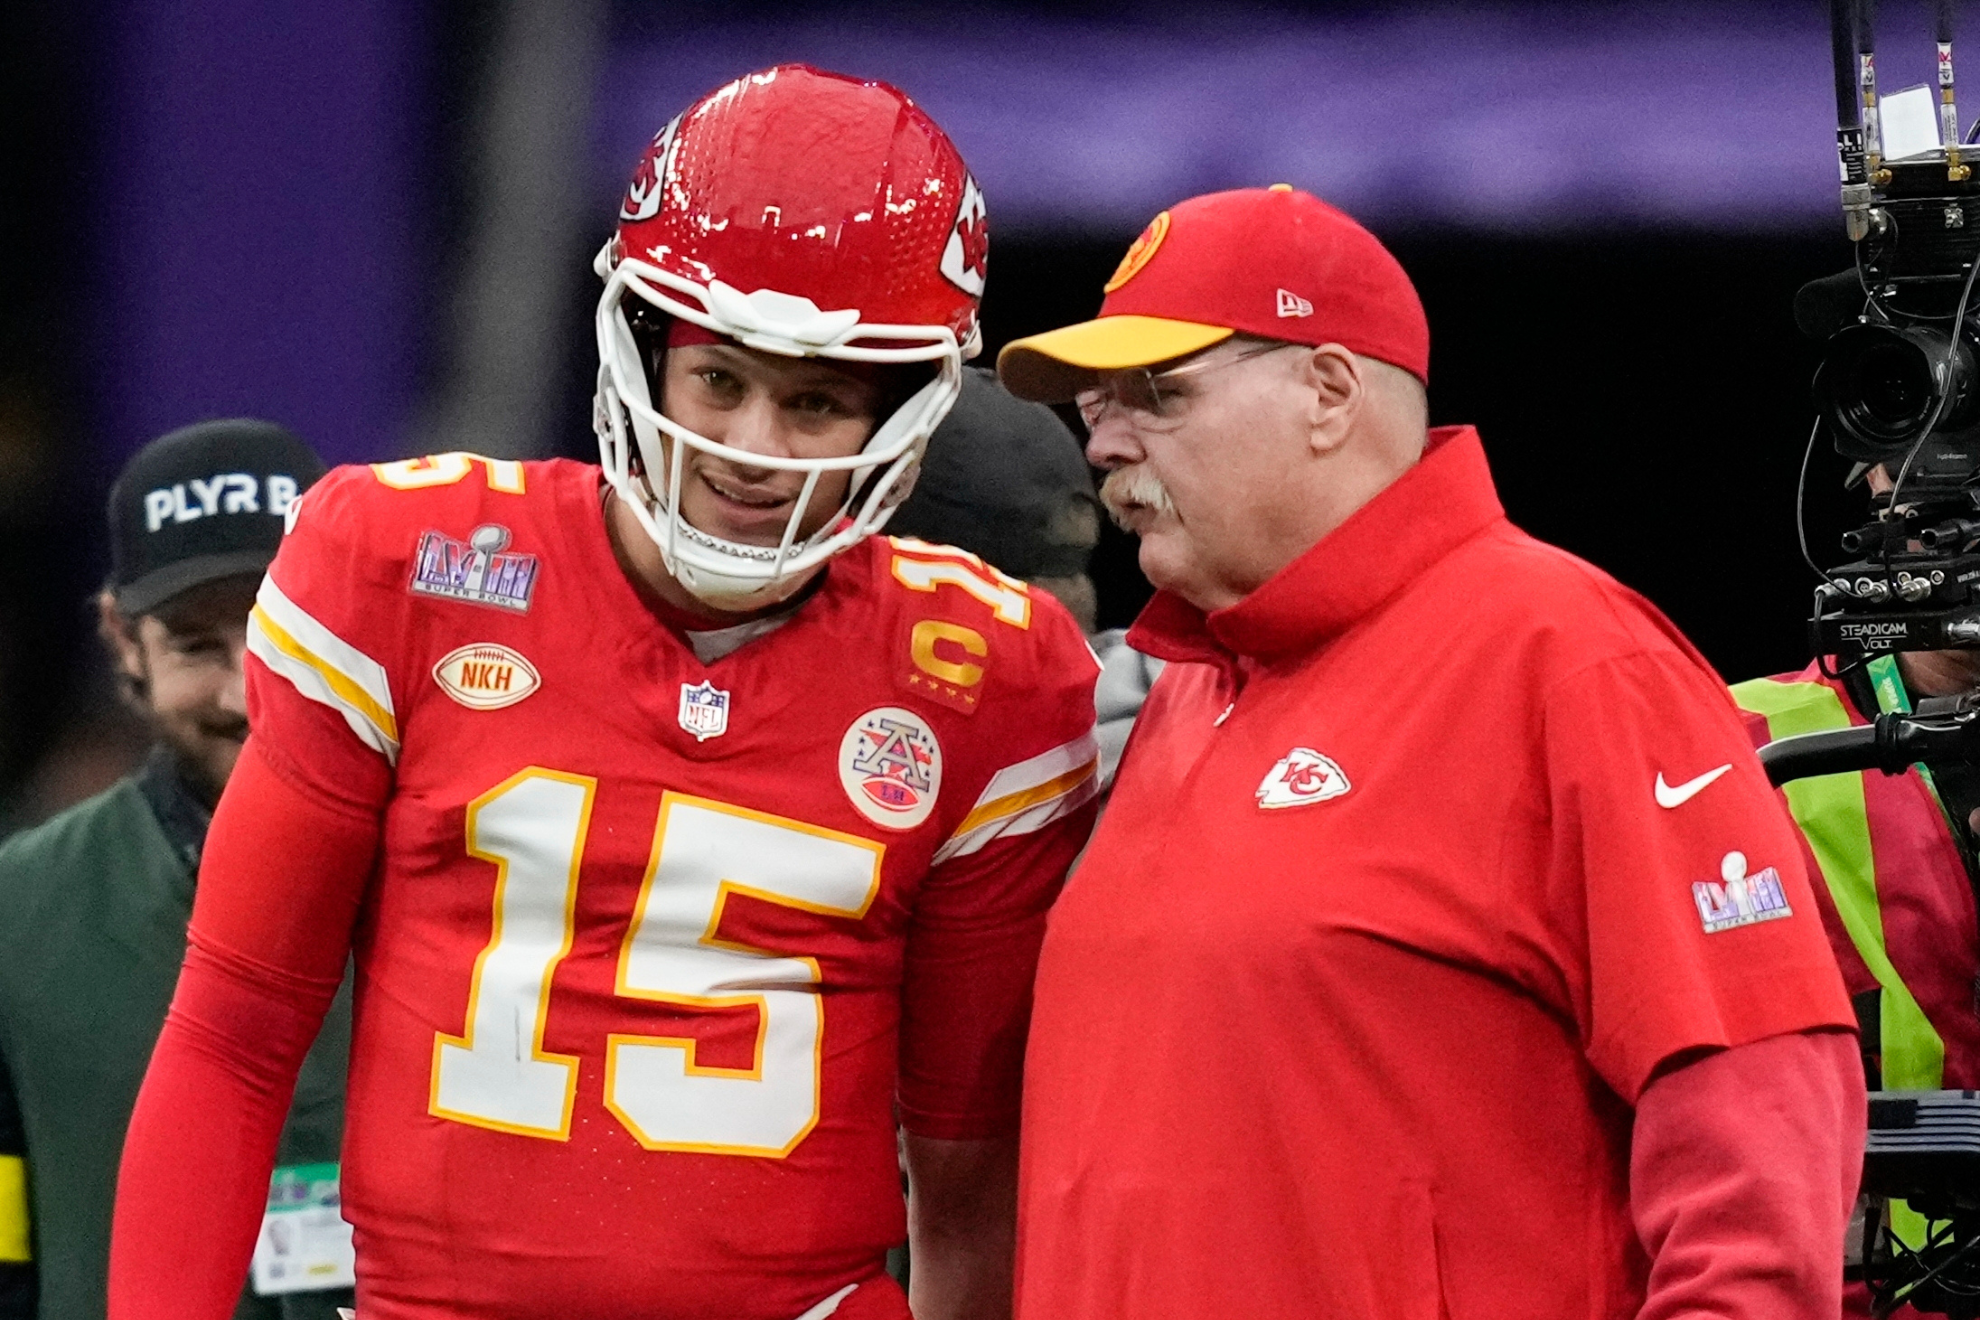 Mahomes and Reid: One of the most successful partnerships in NFL history.